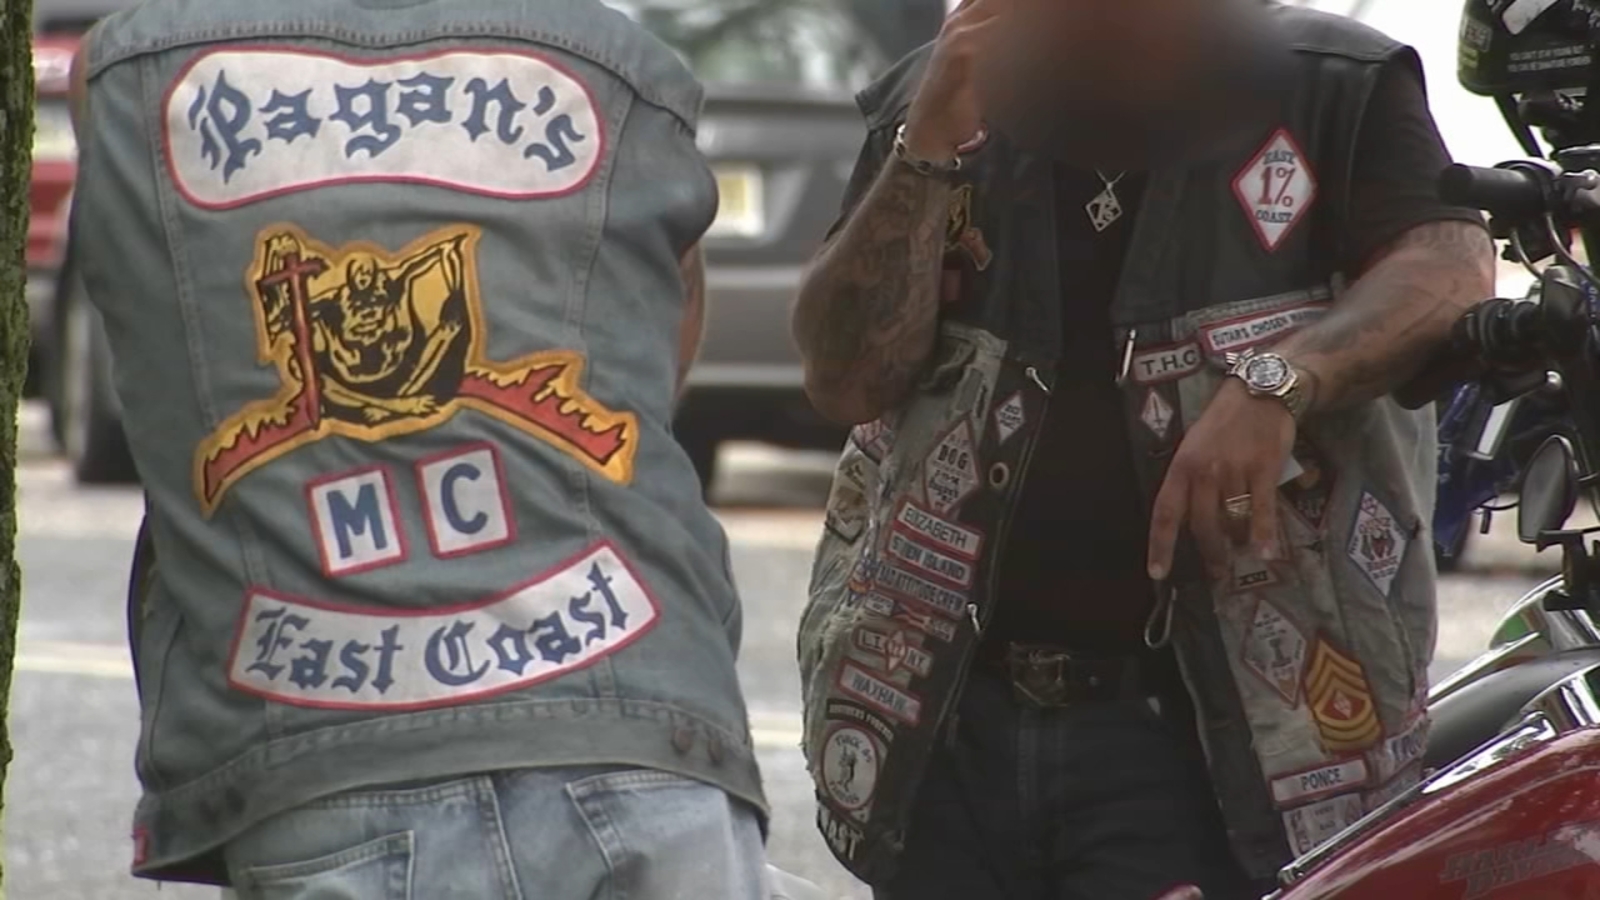 Federal Grand Jury Indicts 30 Members and Associates of the Pagans Motorcycle Club - Breaking911